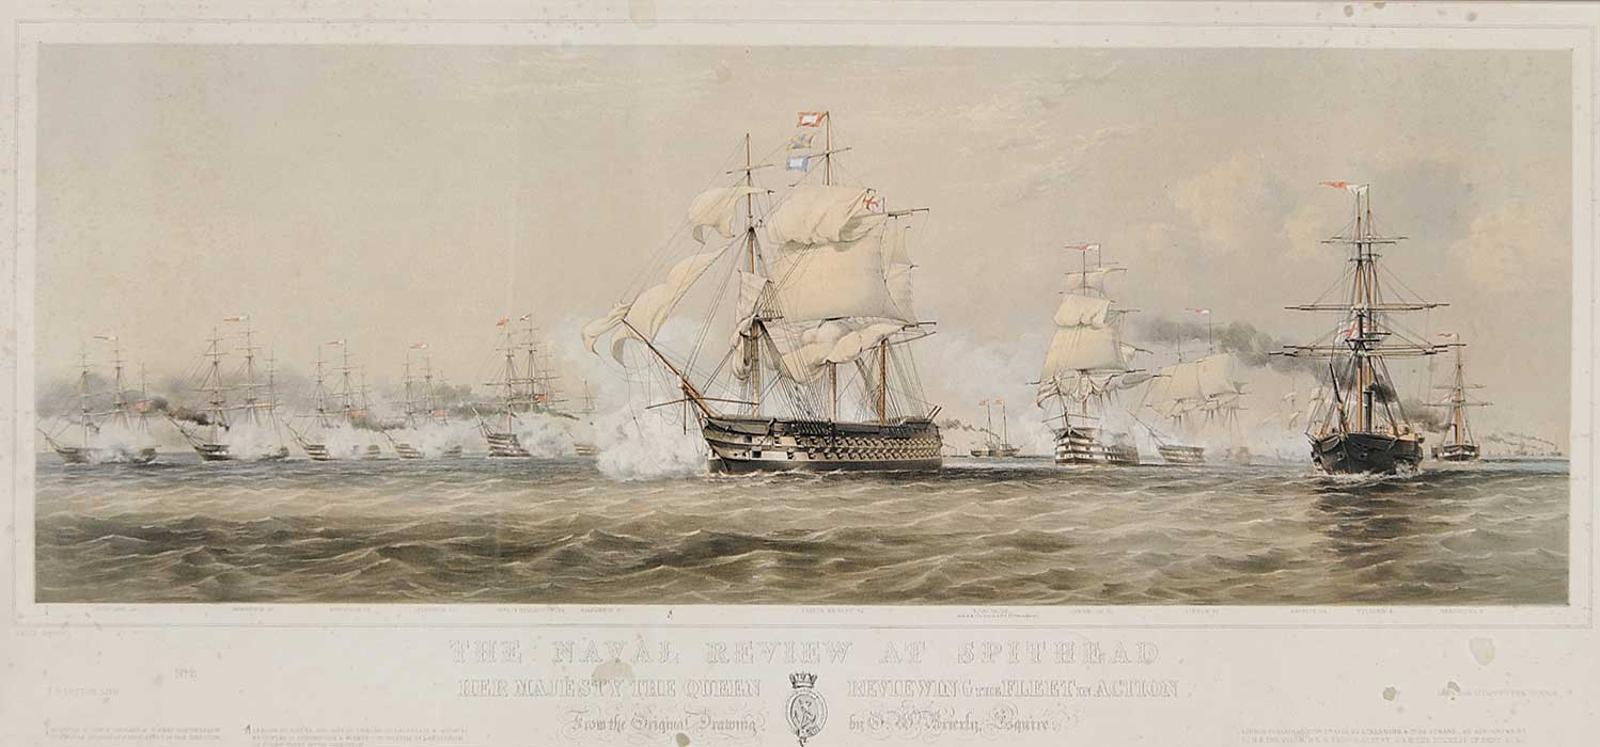 Oswald Walters Brierly - The Naval Review at Spithead, Her Majesty TheQueen Reviewing the Fleet in Action